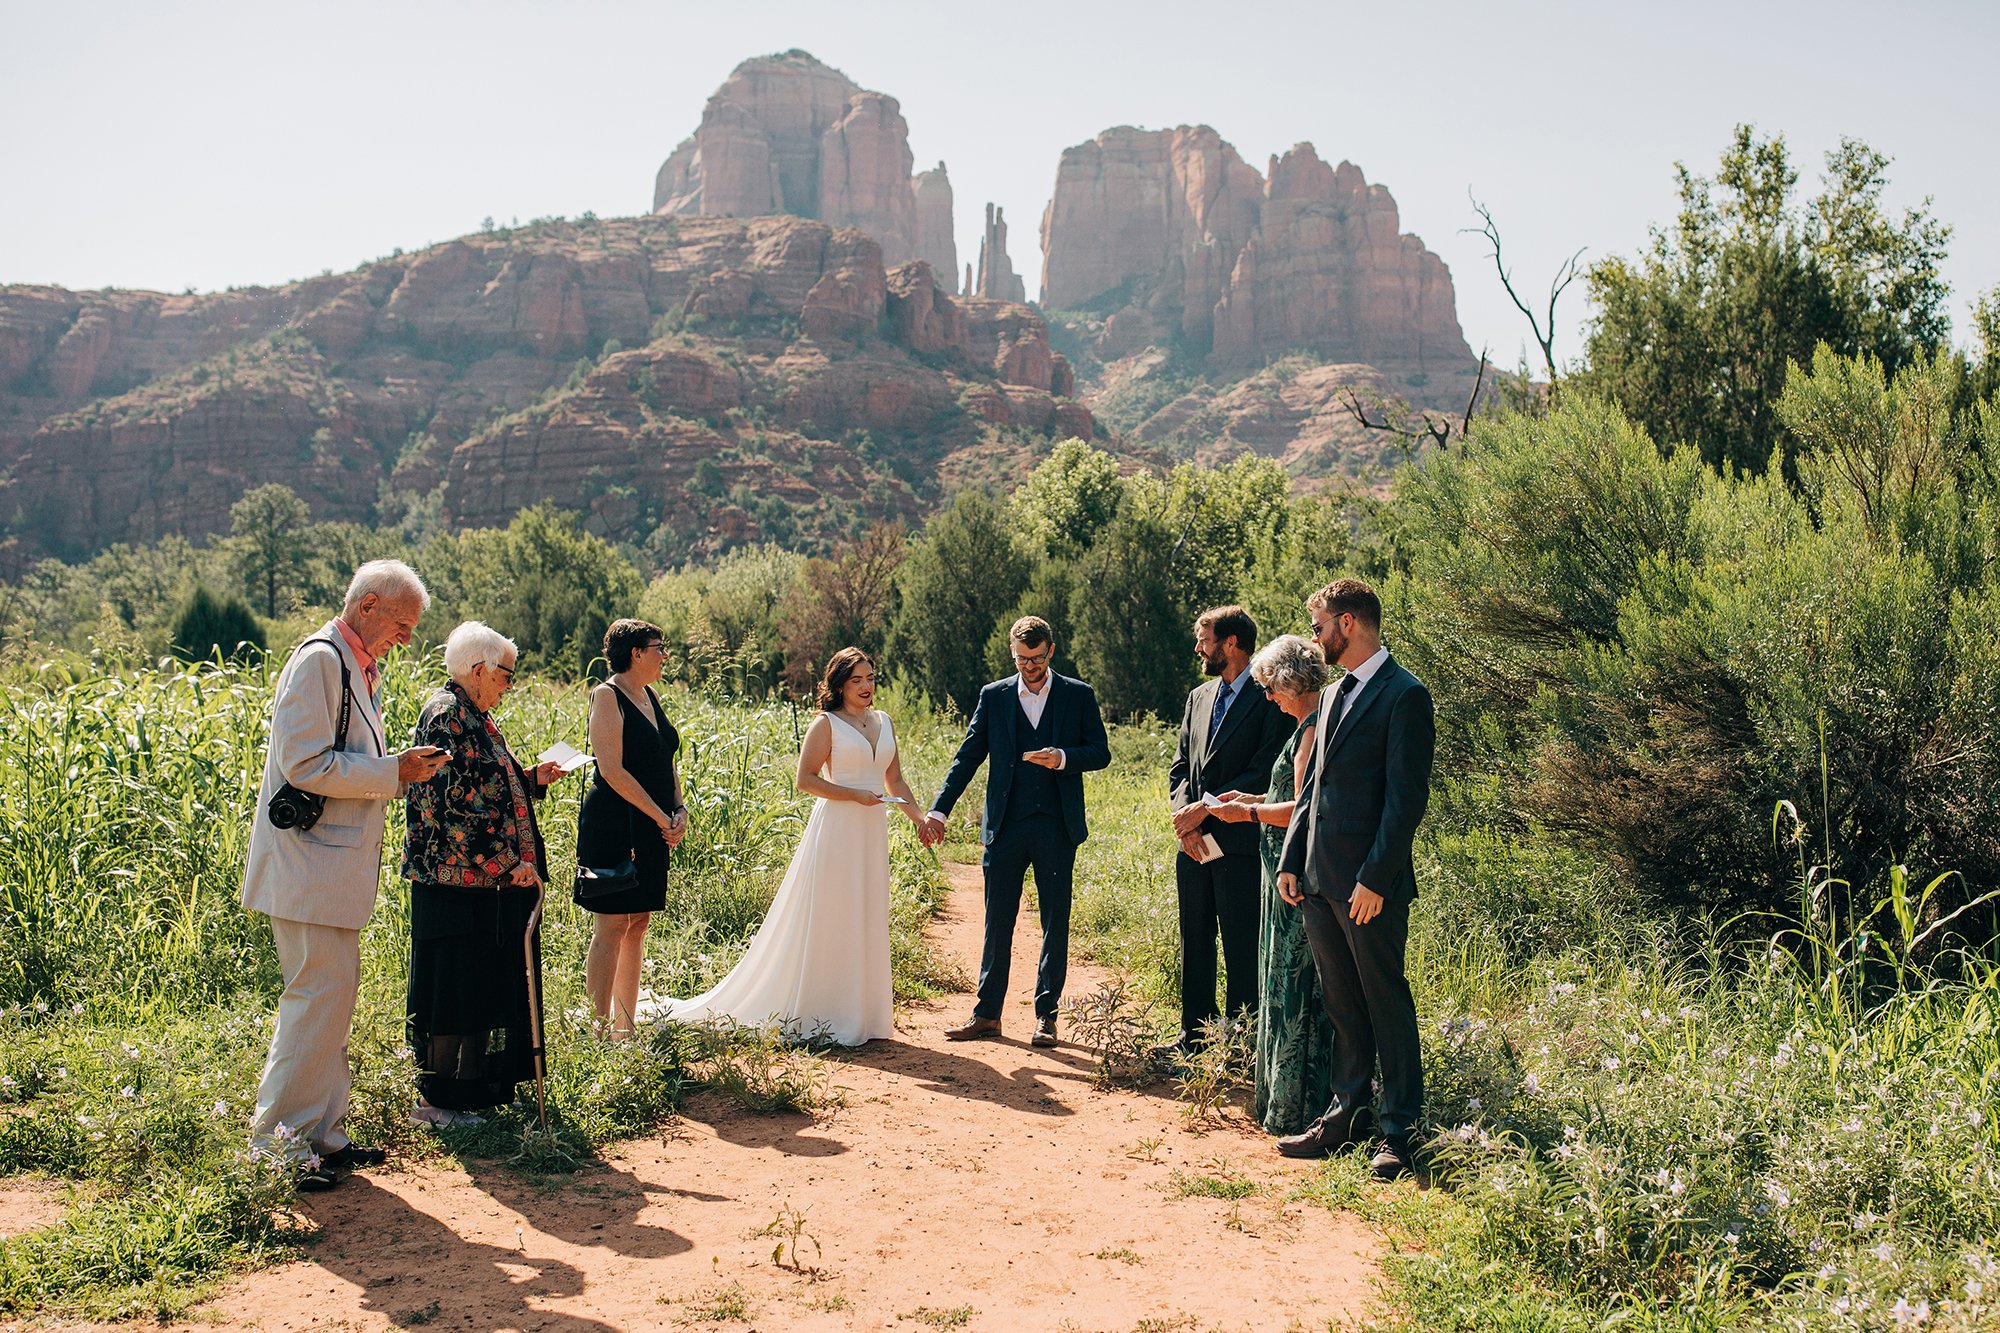 Stephanie and Matthew are surrounded by family on their wedding day, the towering cliffs of Sedona stand in the background